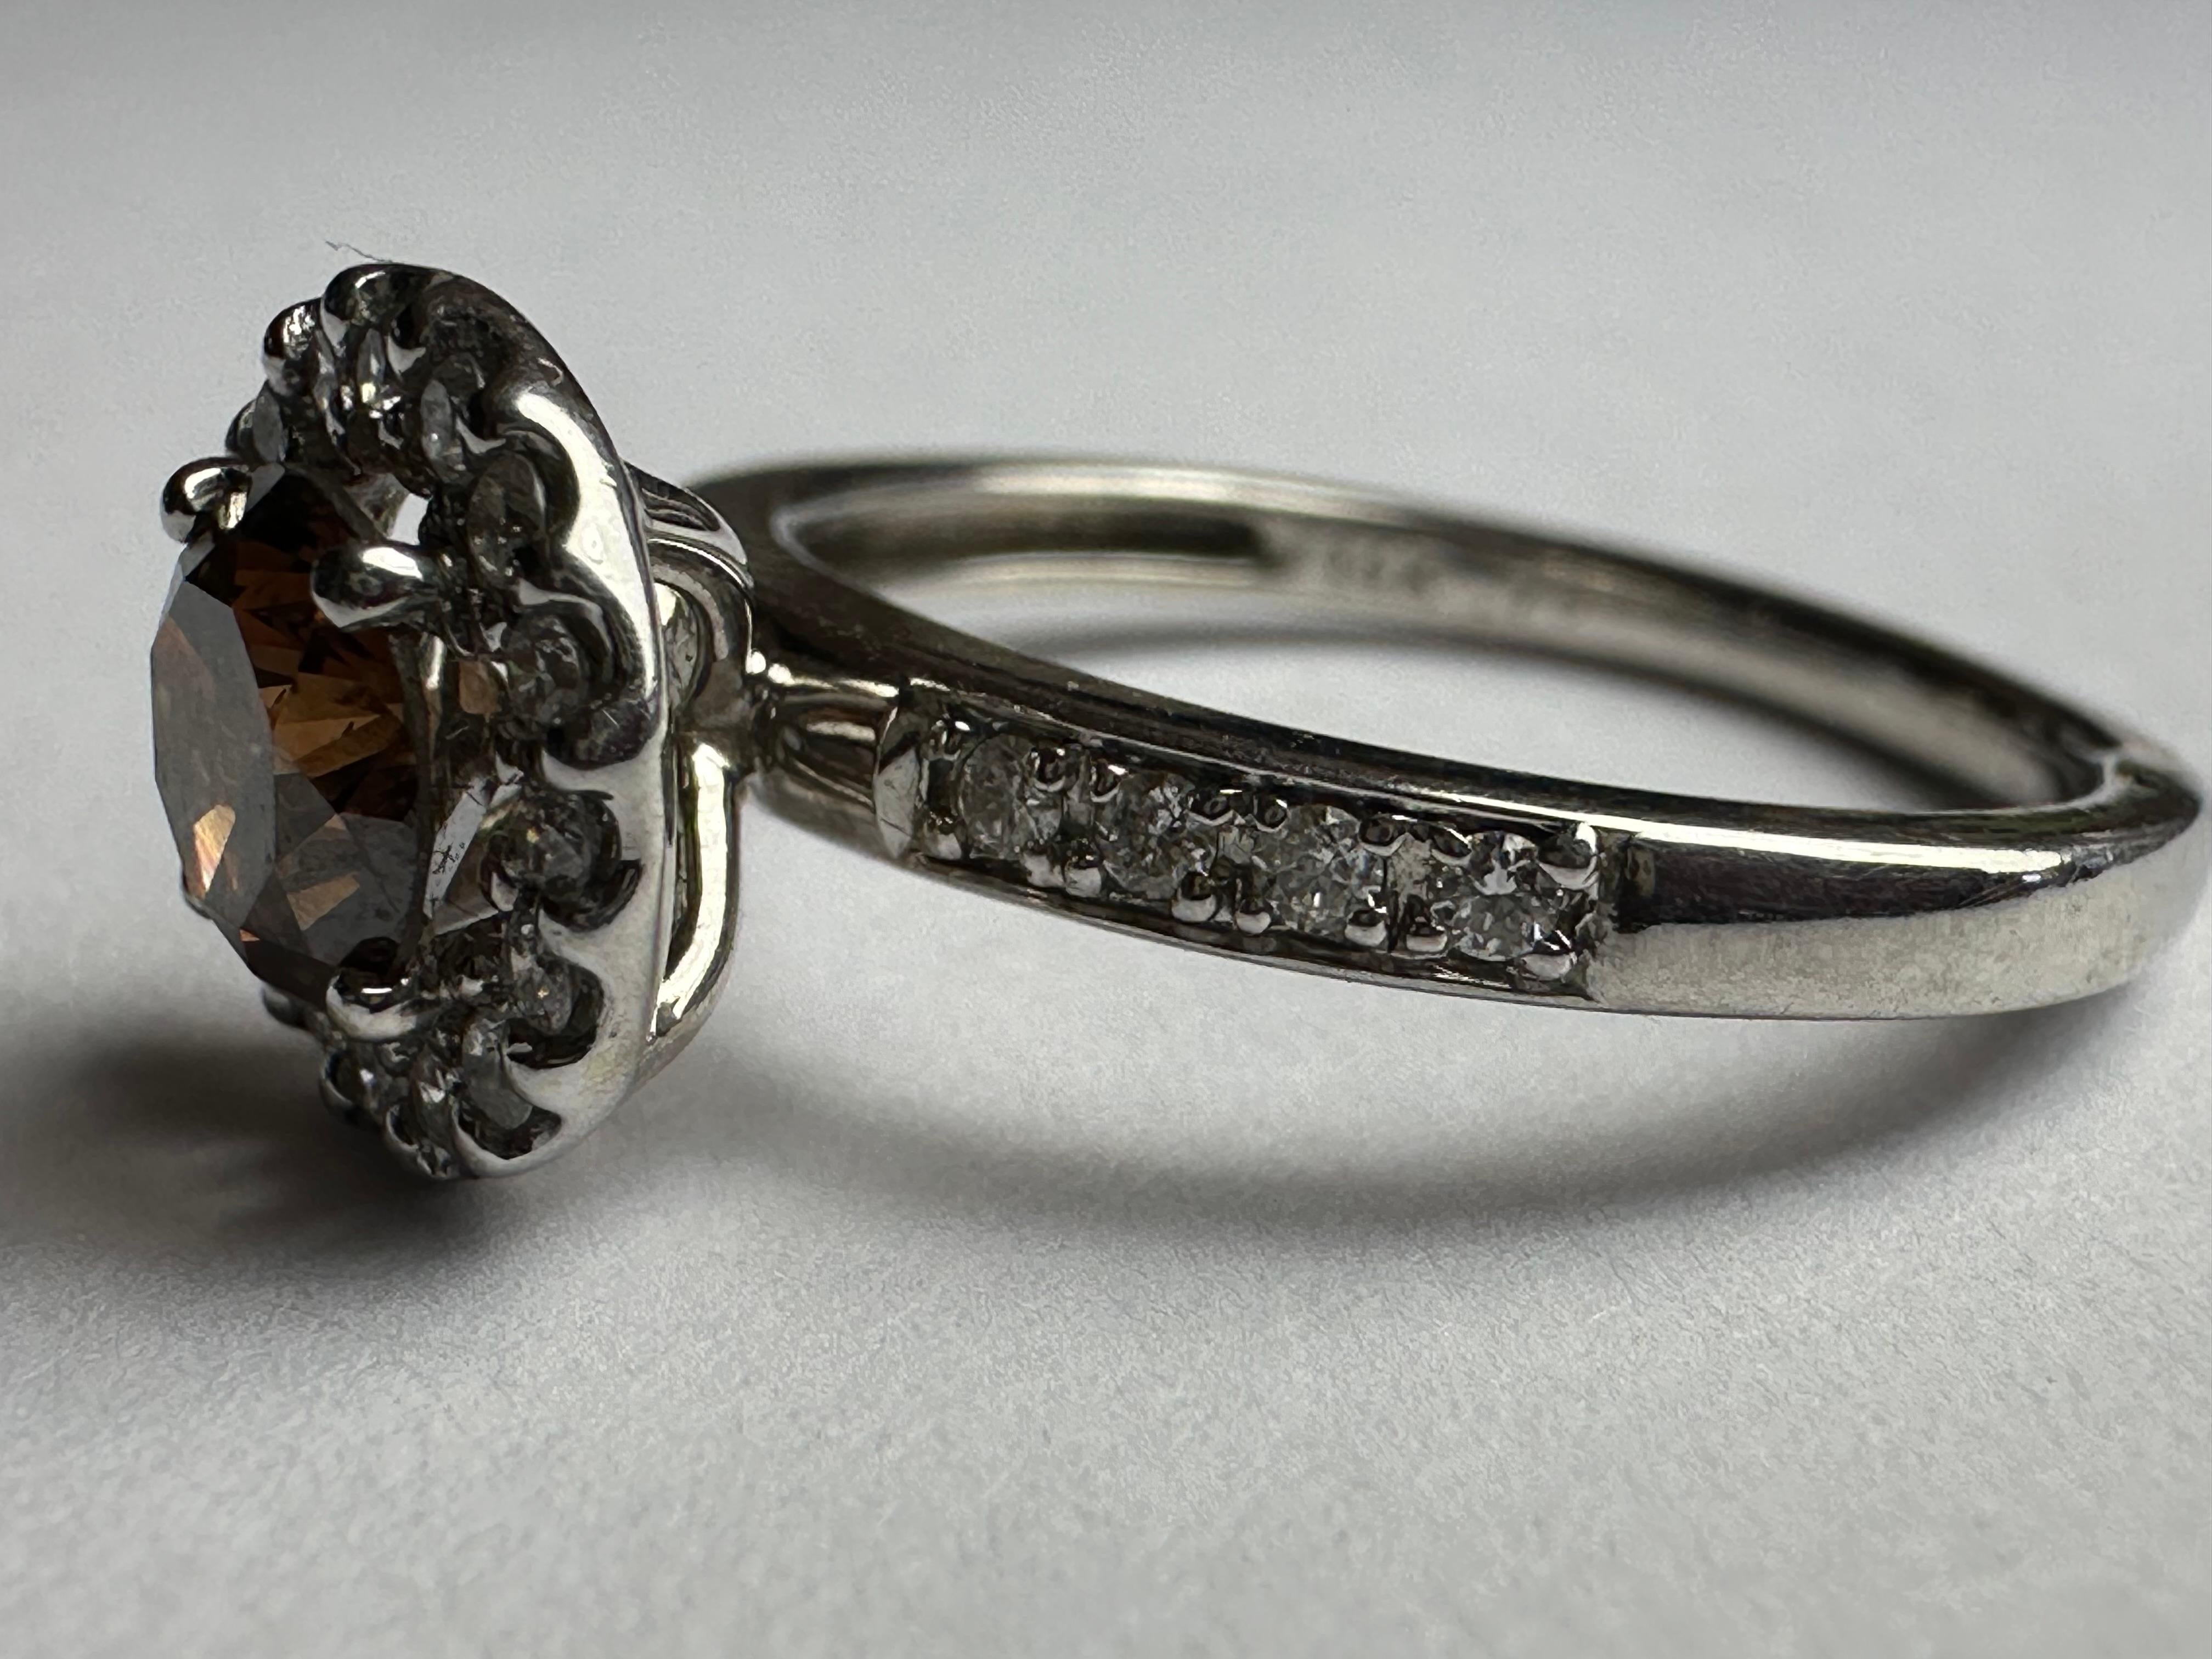 A 0.73-carat round brilliant-cut natural fancy brown or golden-hued diamond, also known as a chocolate diamond, centers this dazzling ring, encircled by a halo of bright white diamonds. Set in 14k white gold. 
